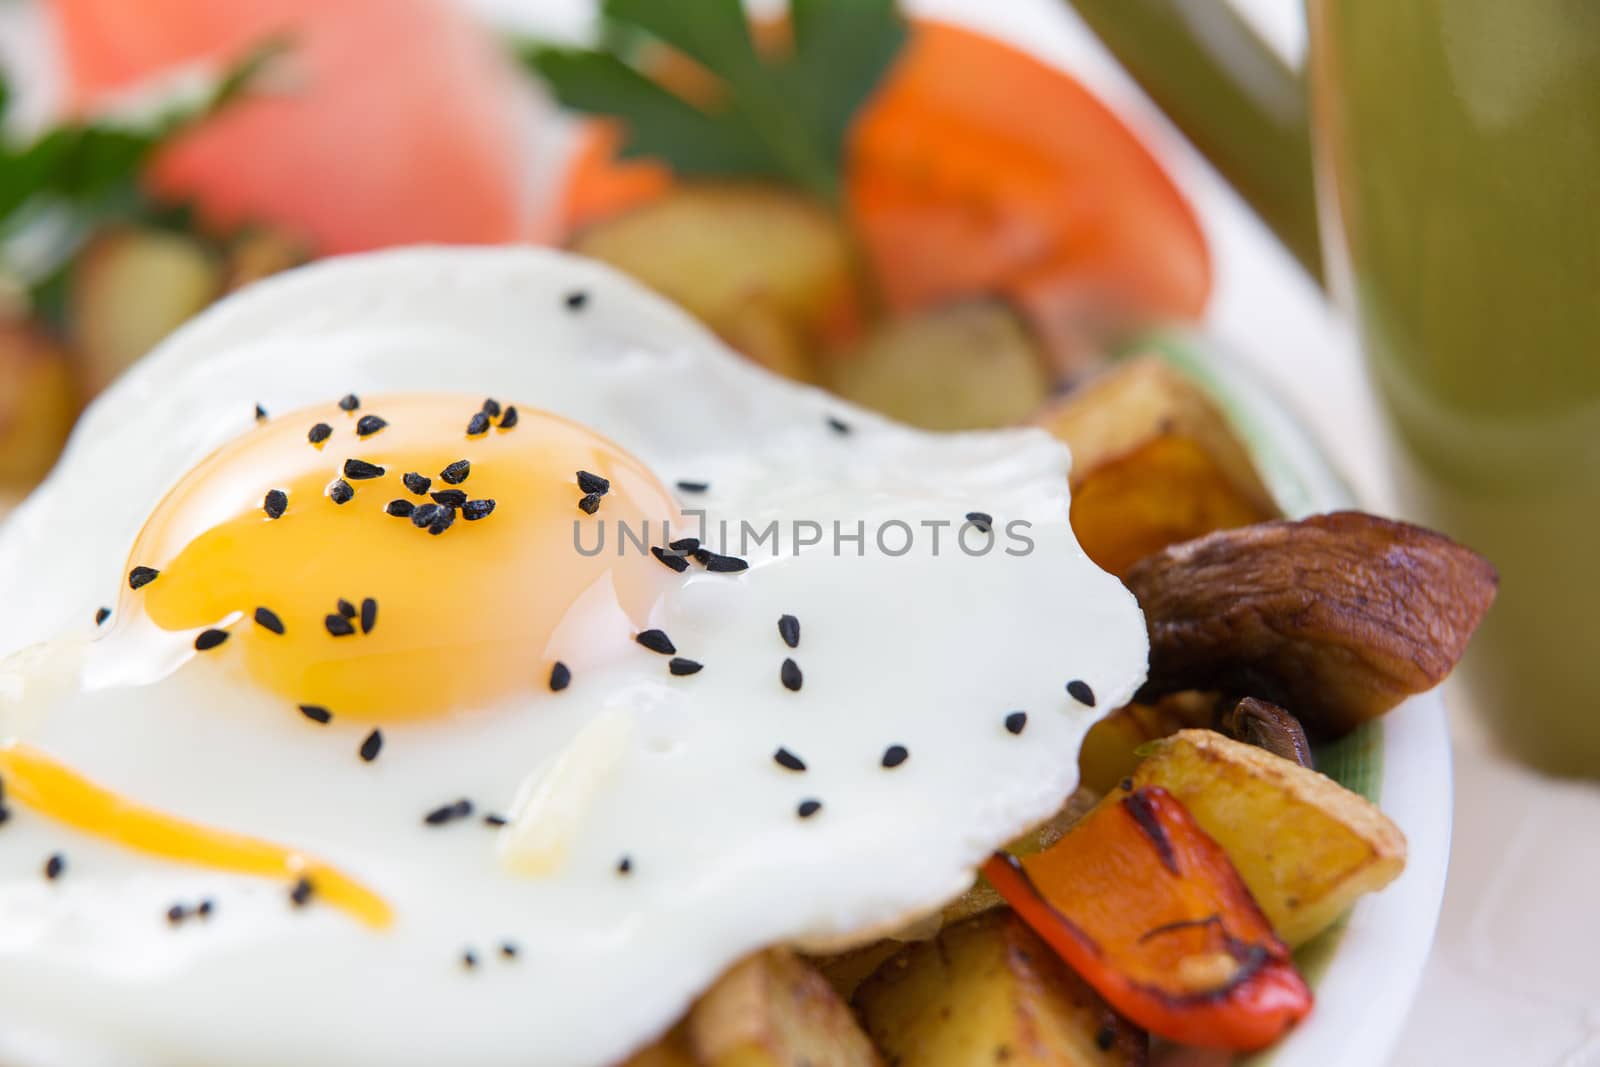 Wholesome meal of a delicious sunny side up fried egg with a rich yellow yolk and vegetables including potatoes, sliced tomato and mushrooms, high angle closeup view